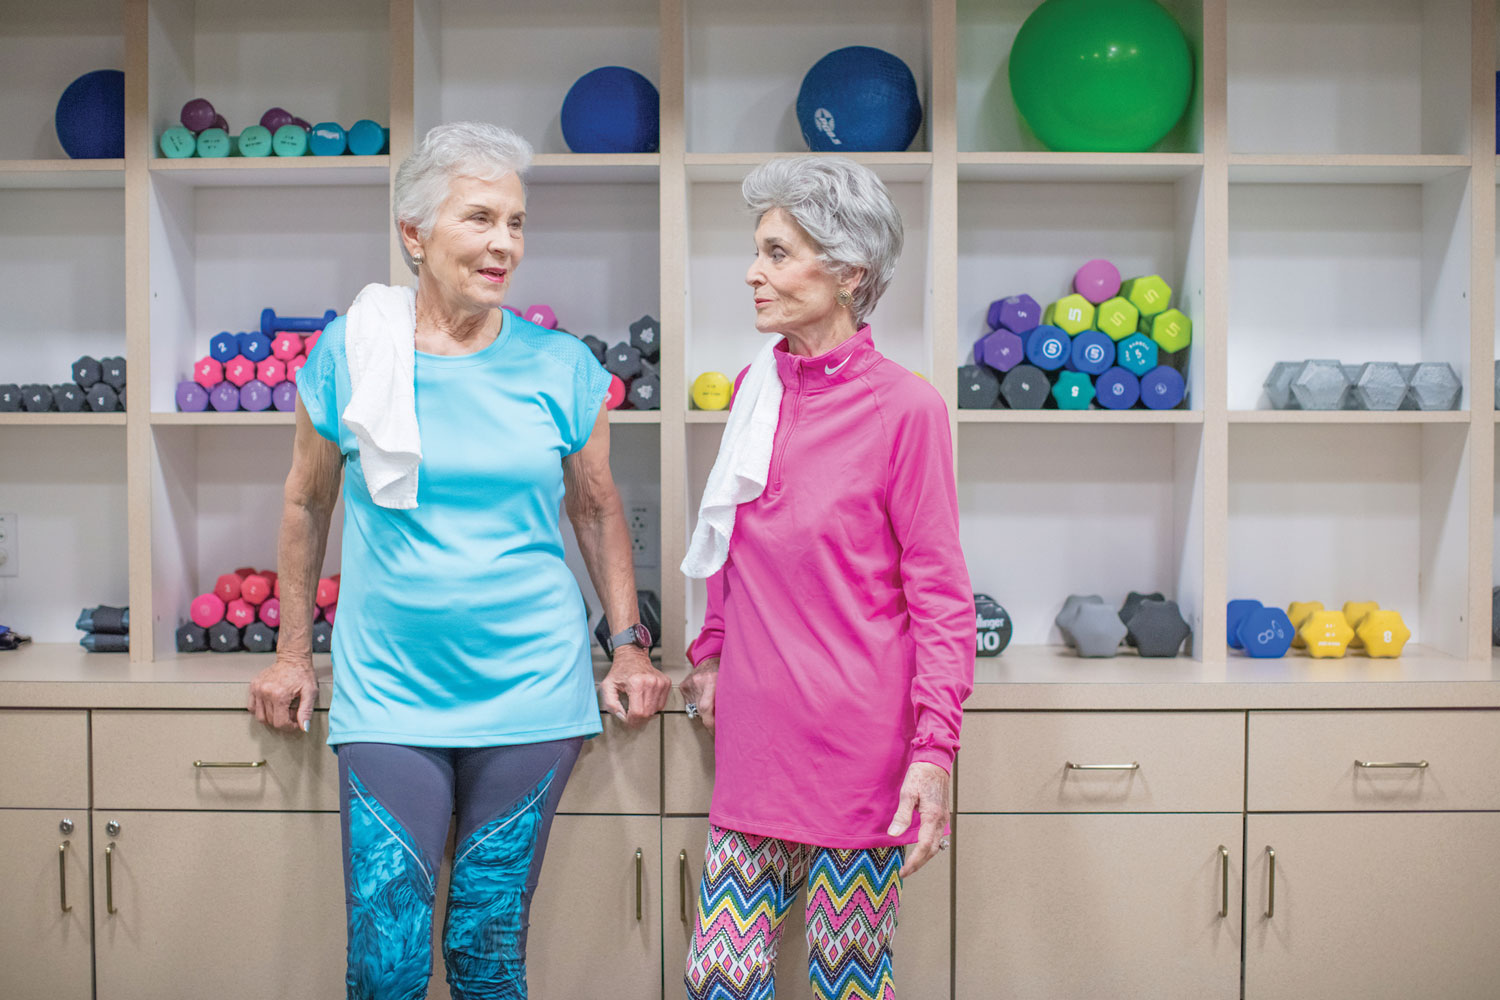 Two mature adult women standing & chatting together in front of shelving with workout equipment & barbells